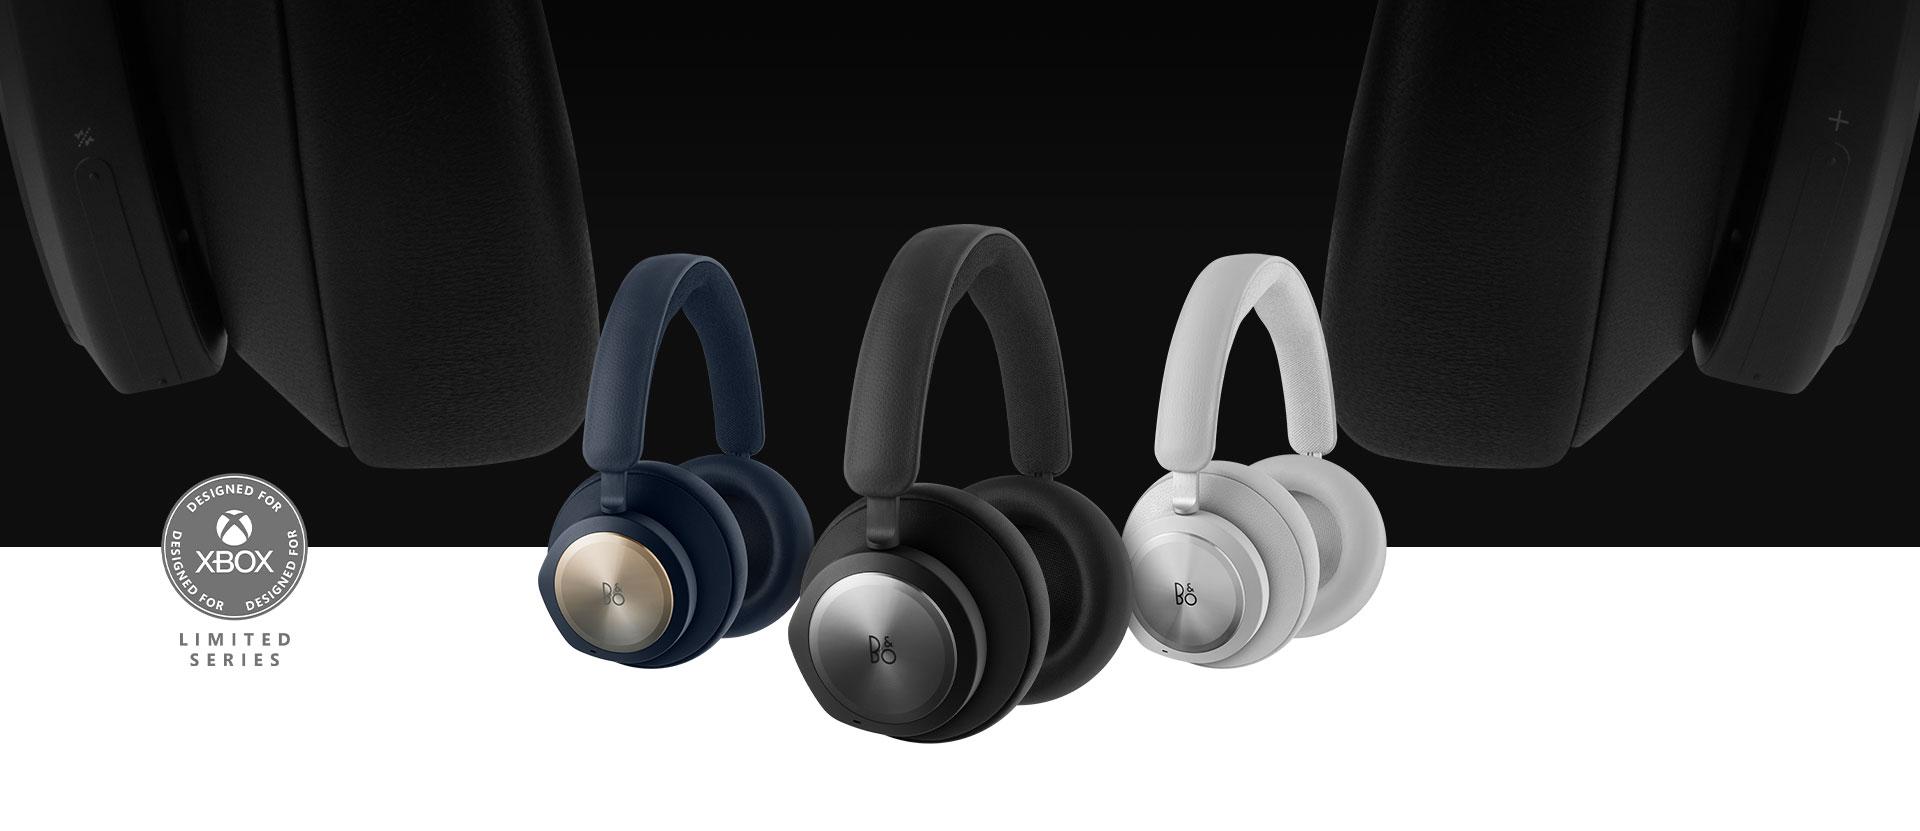 Designed for Xbox, Bang and Olufsen black headset in front with the grey and navy headset beside it